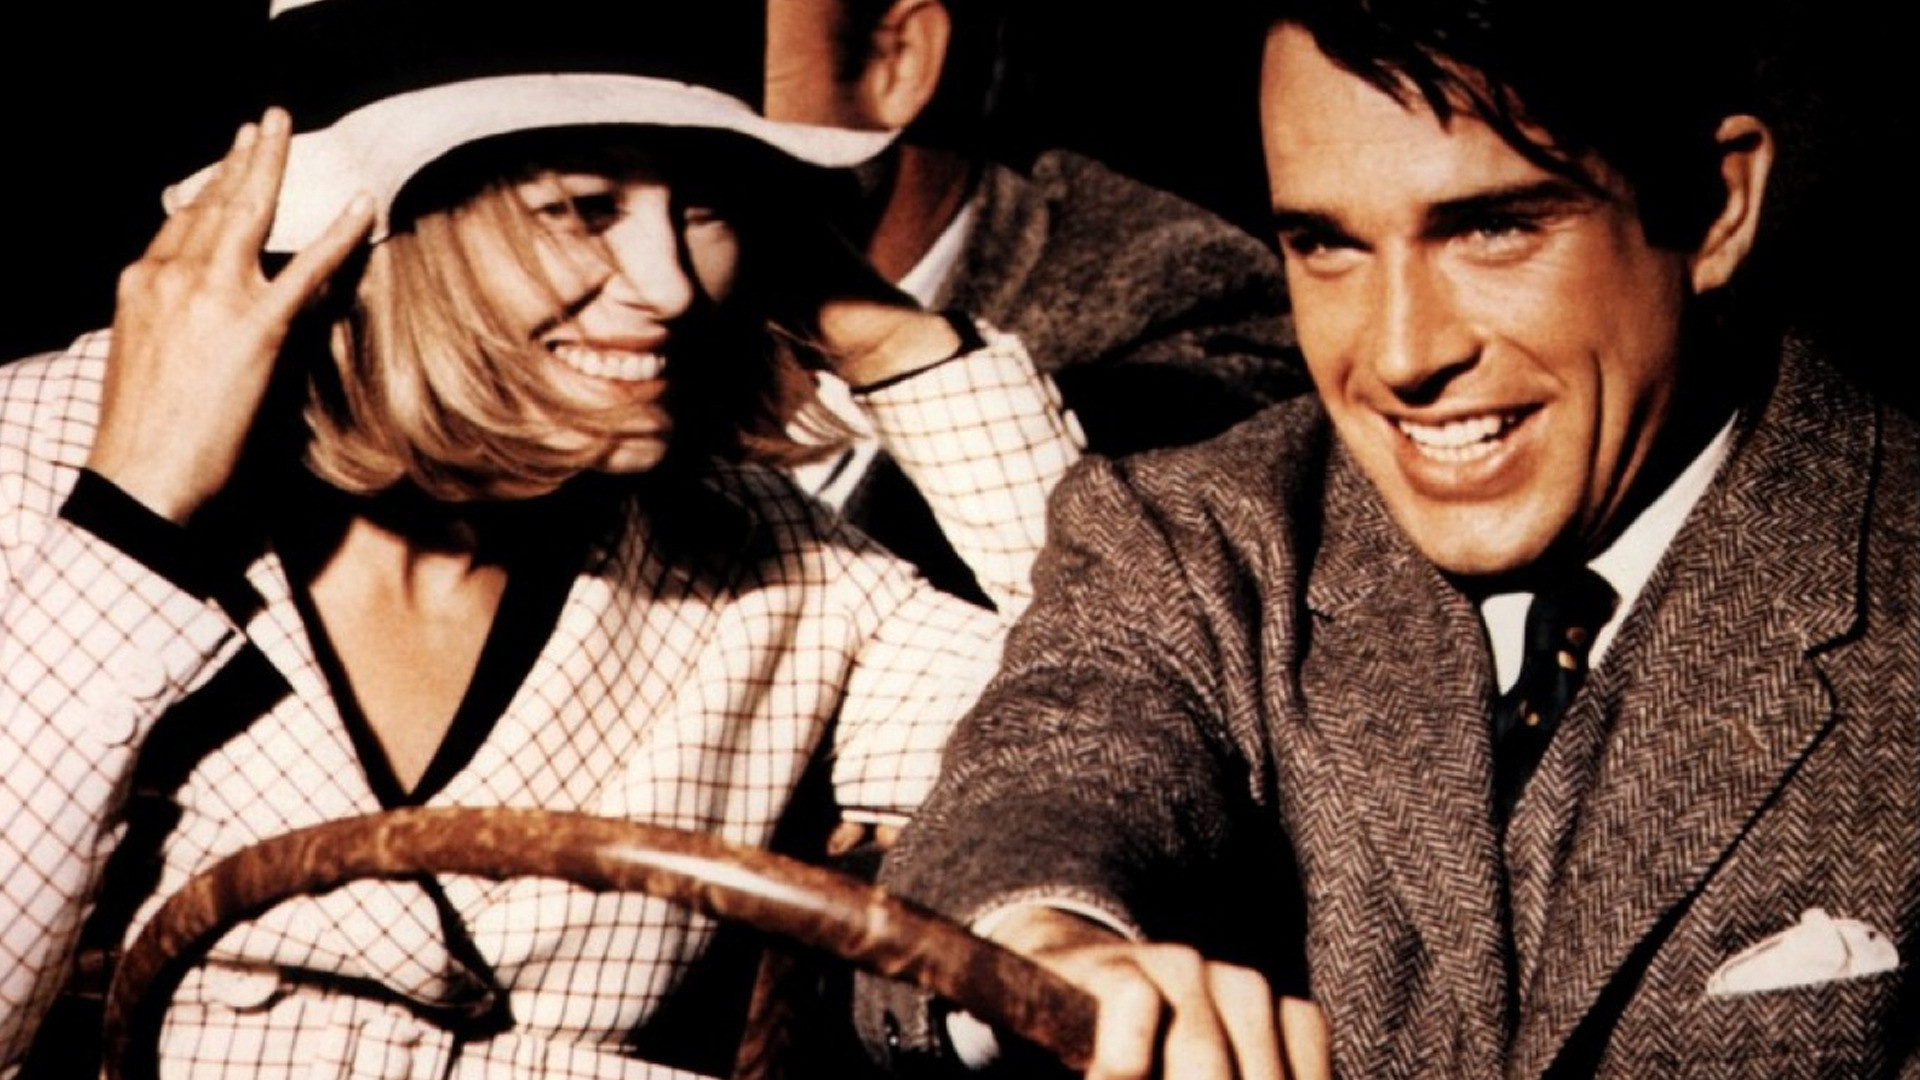 Bonnie and Clyde wallpaper, Infamous duo, Ruthless criminals, Iconic robbery, 1920x1080 Full HD Desktop